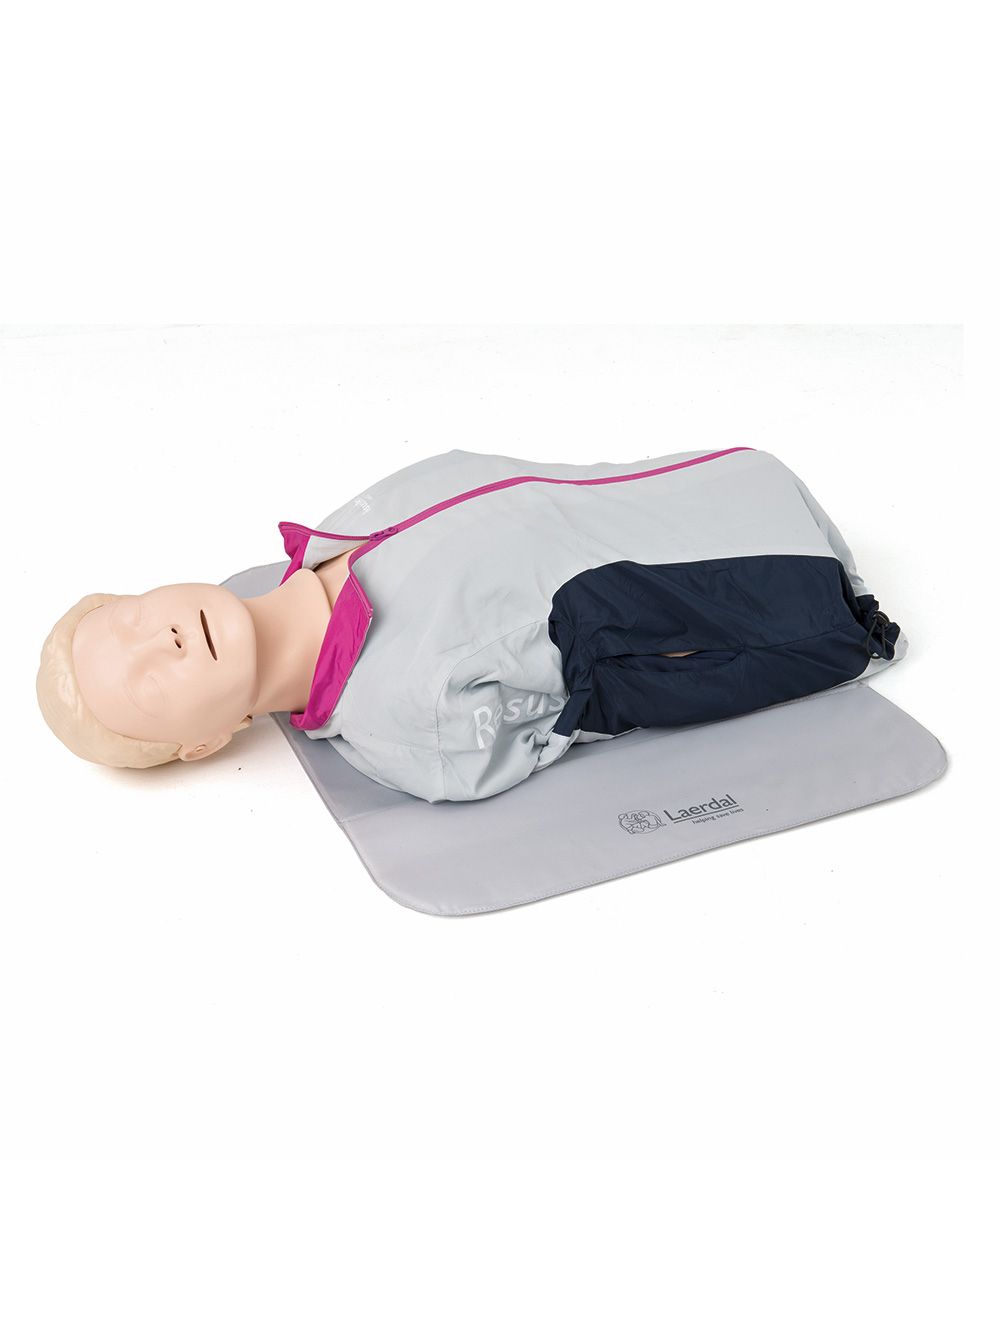 Laerdal® Resusci® Anne QCPR AED, Rechargeable